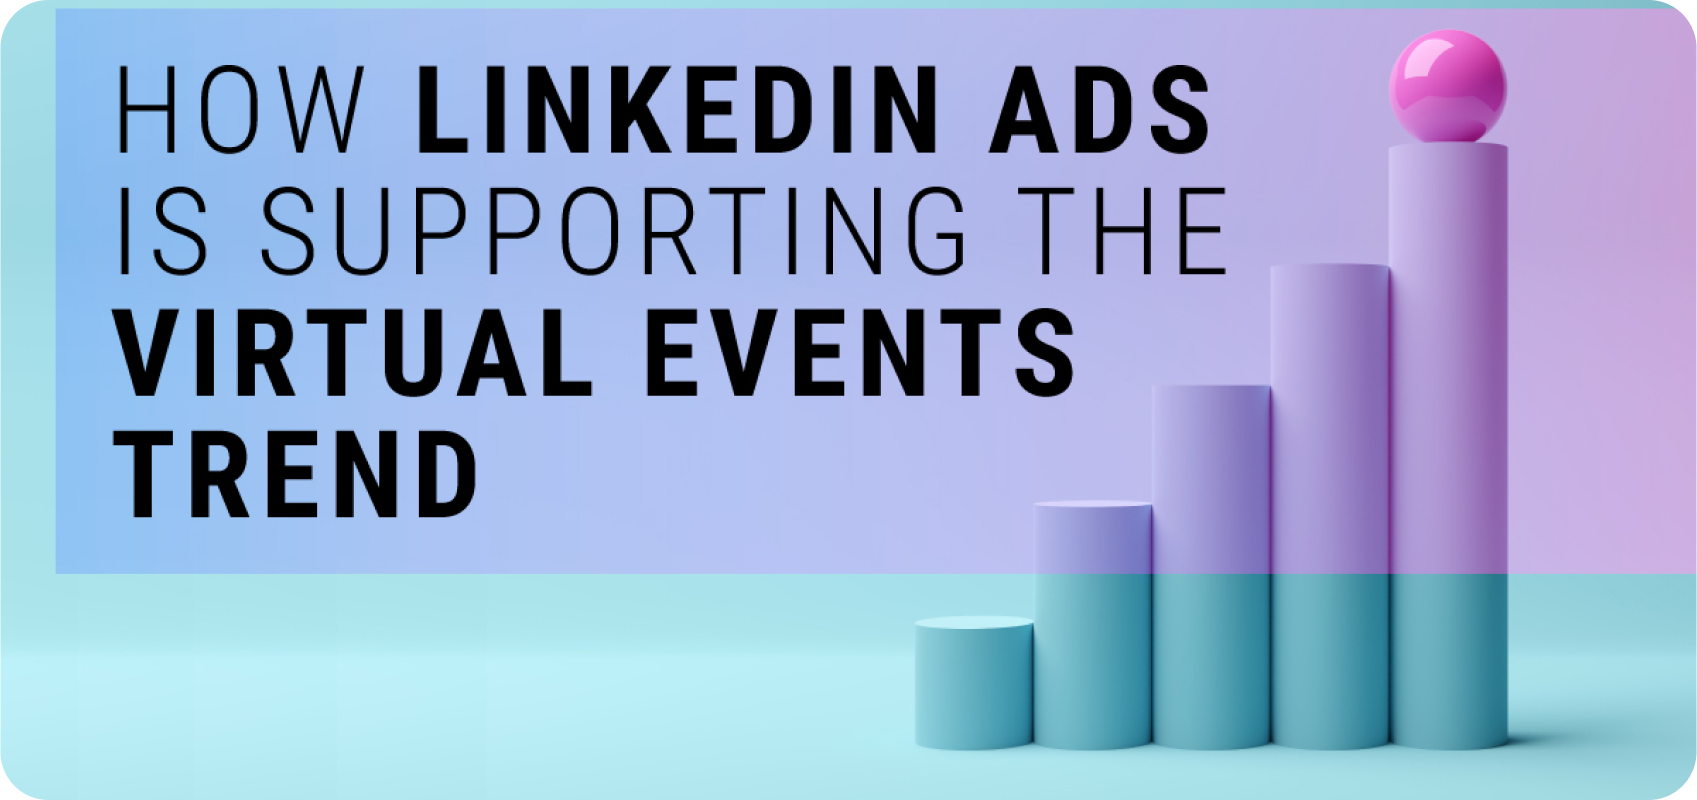 "How LinkedIn Ads is supporting the virtual events trend"